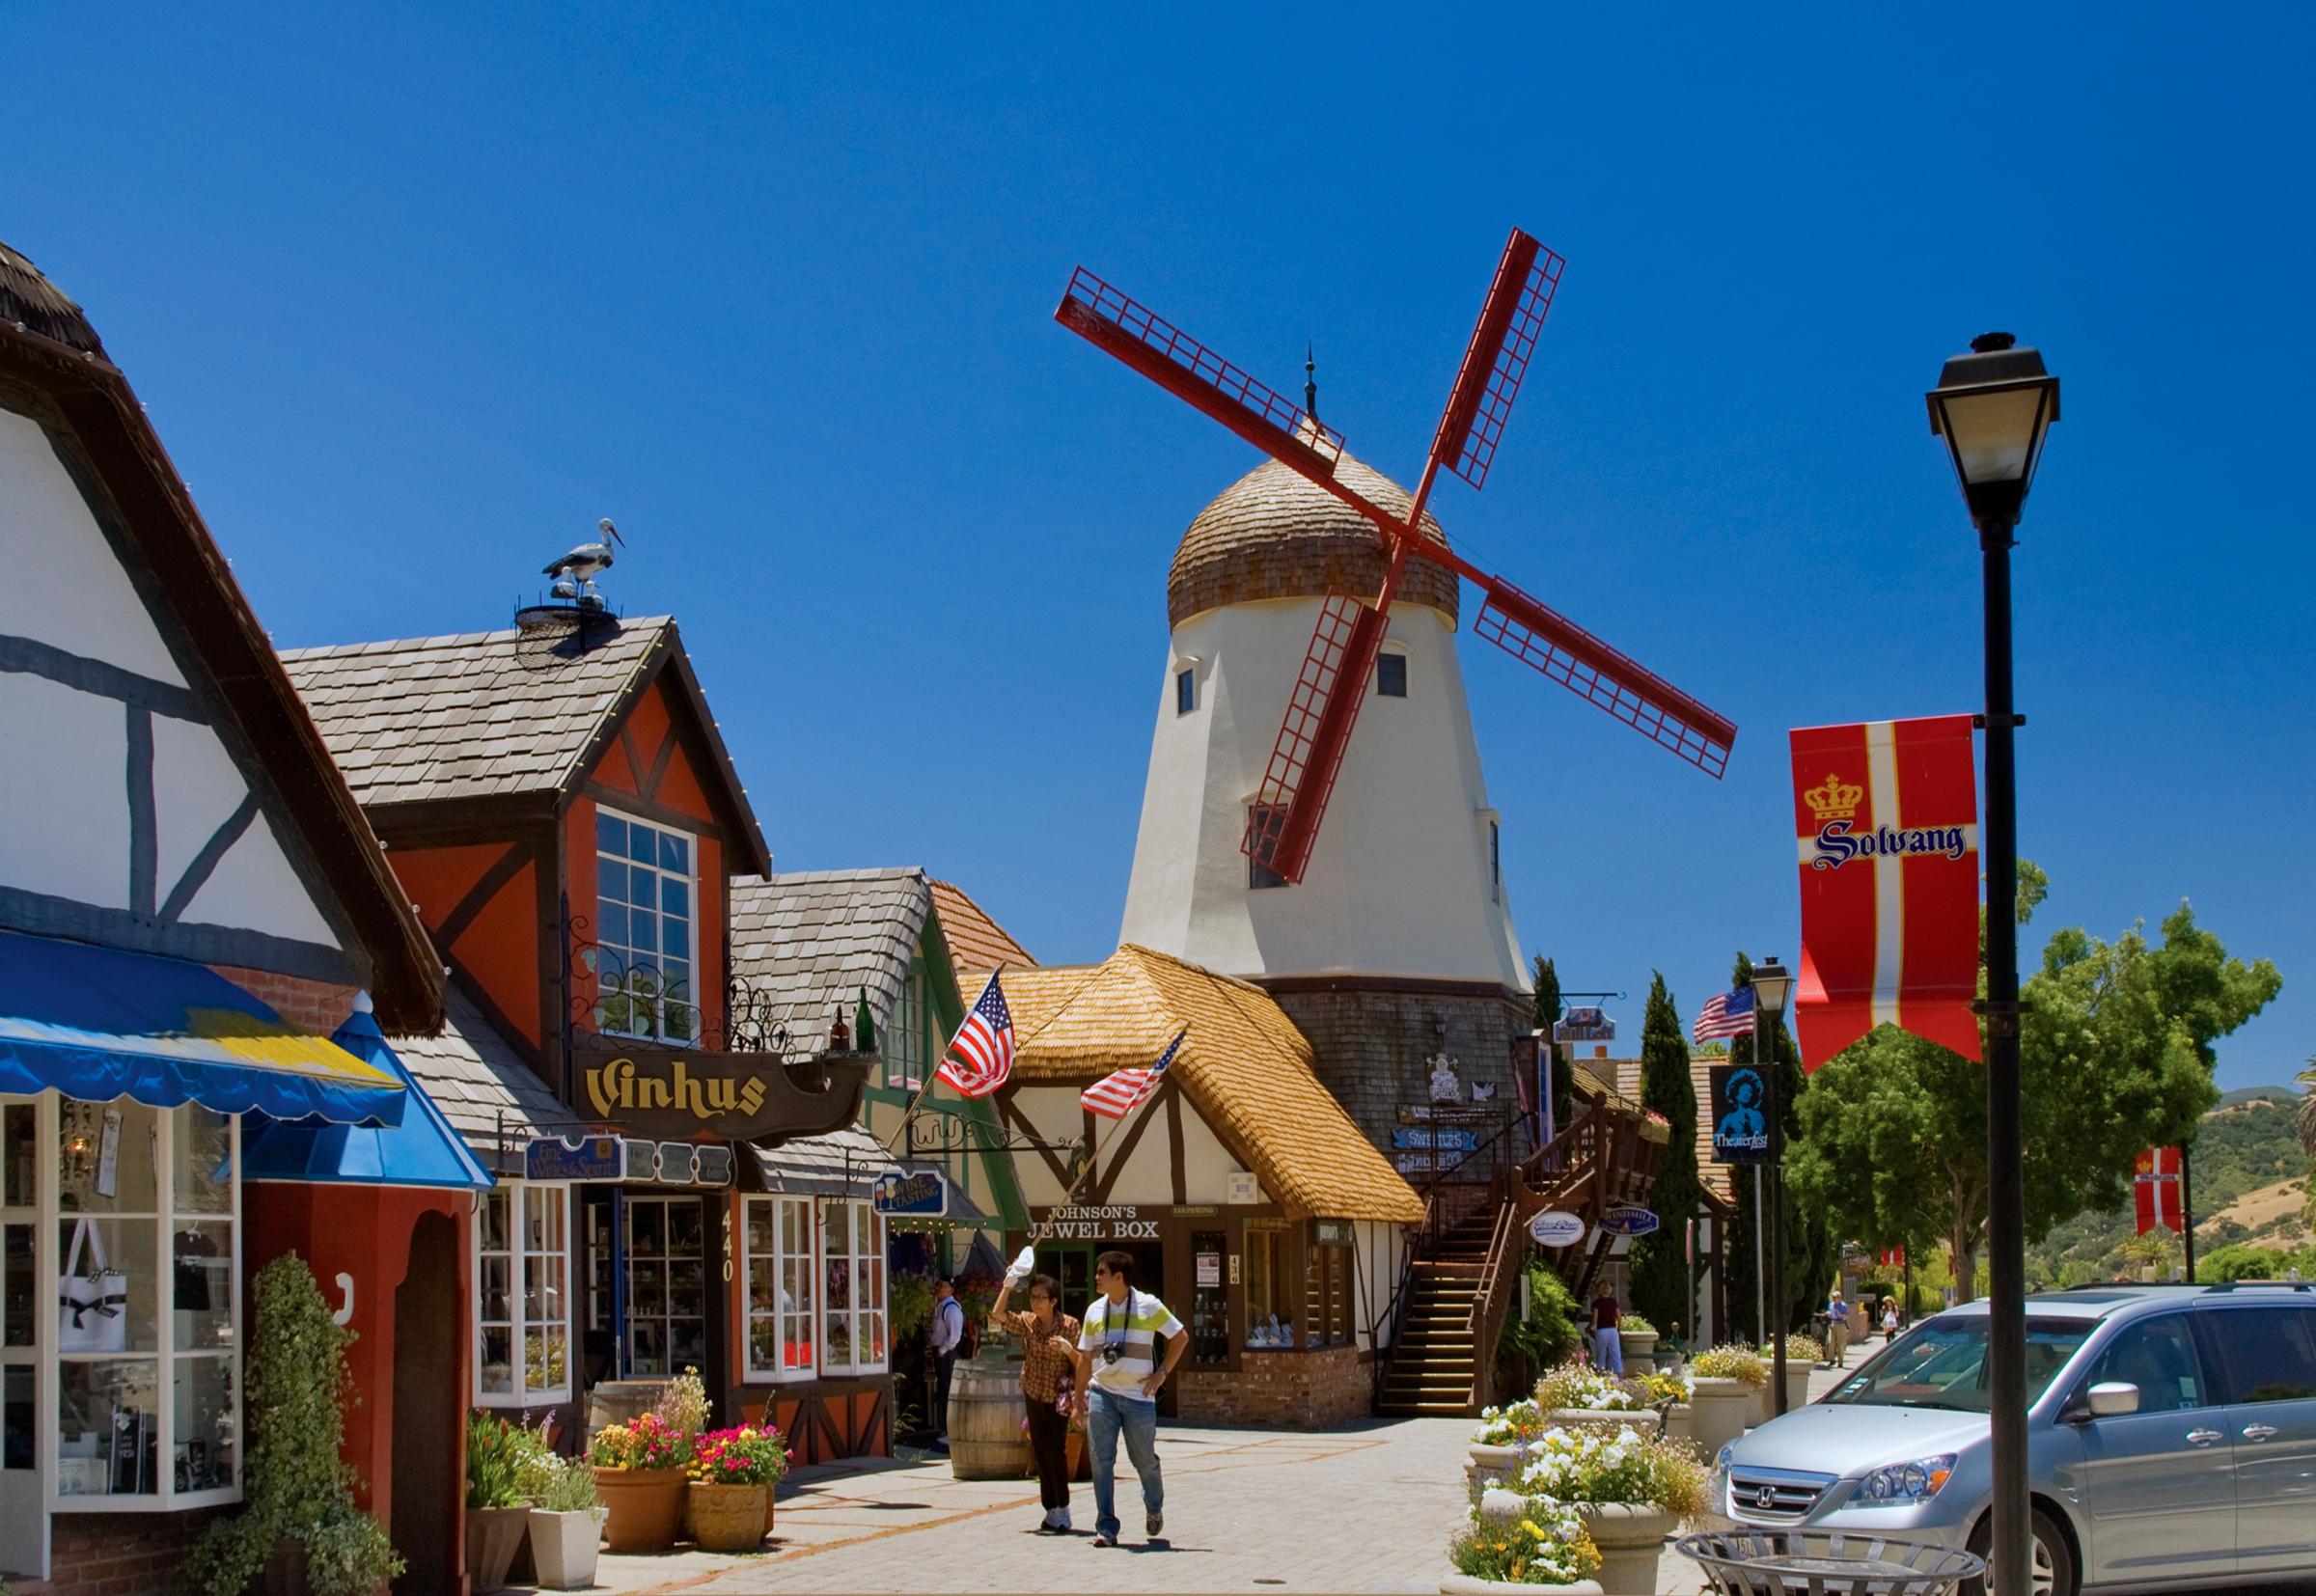 Windmill imitation and shops along Alisol Road in Danish Village.